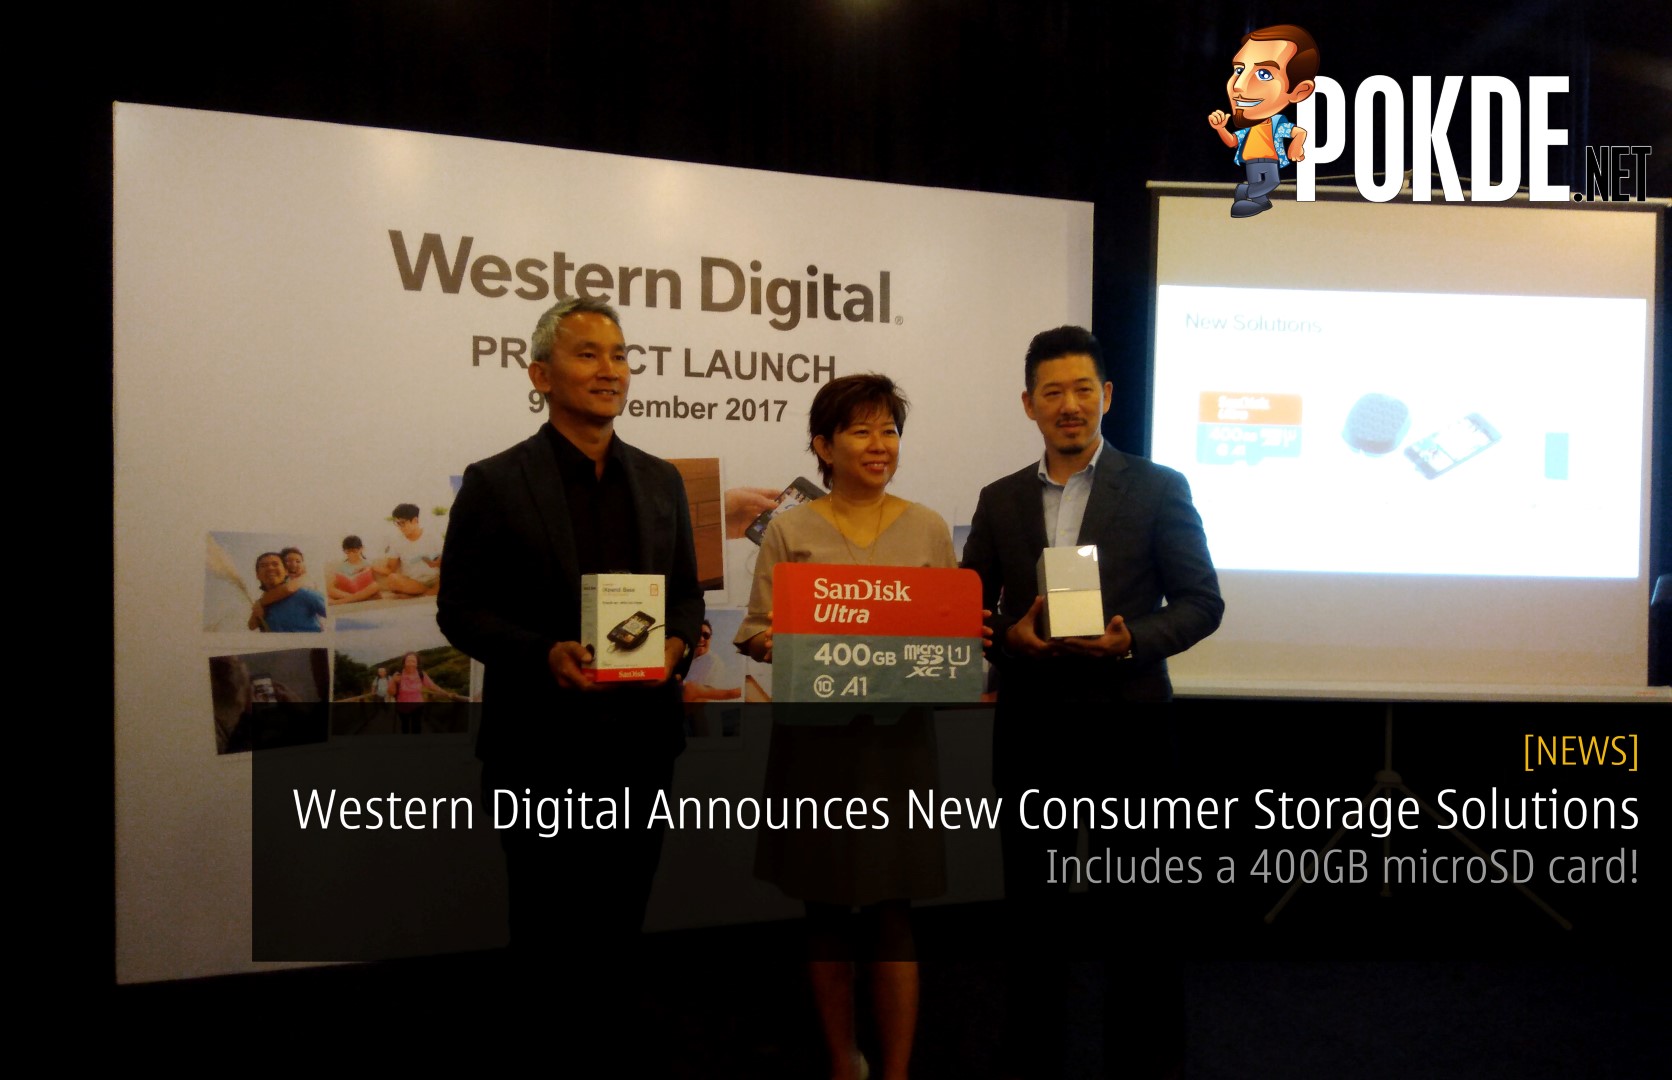 Western Digital Announces New Consumer Storage Solutions - Includes a 400GB microSD card! 37